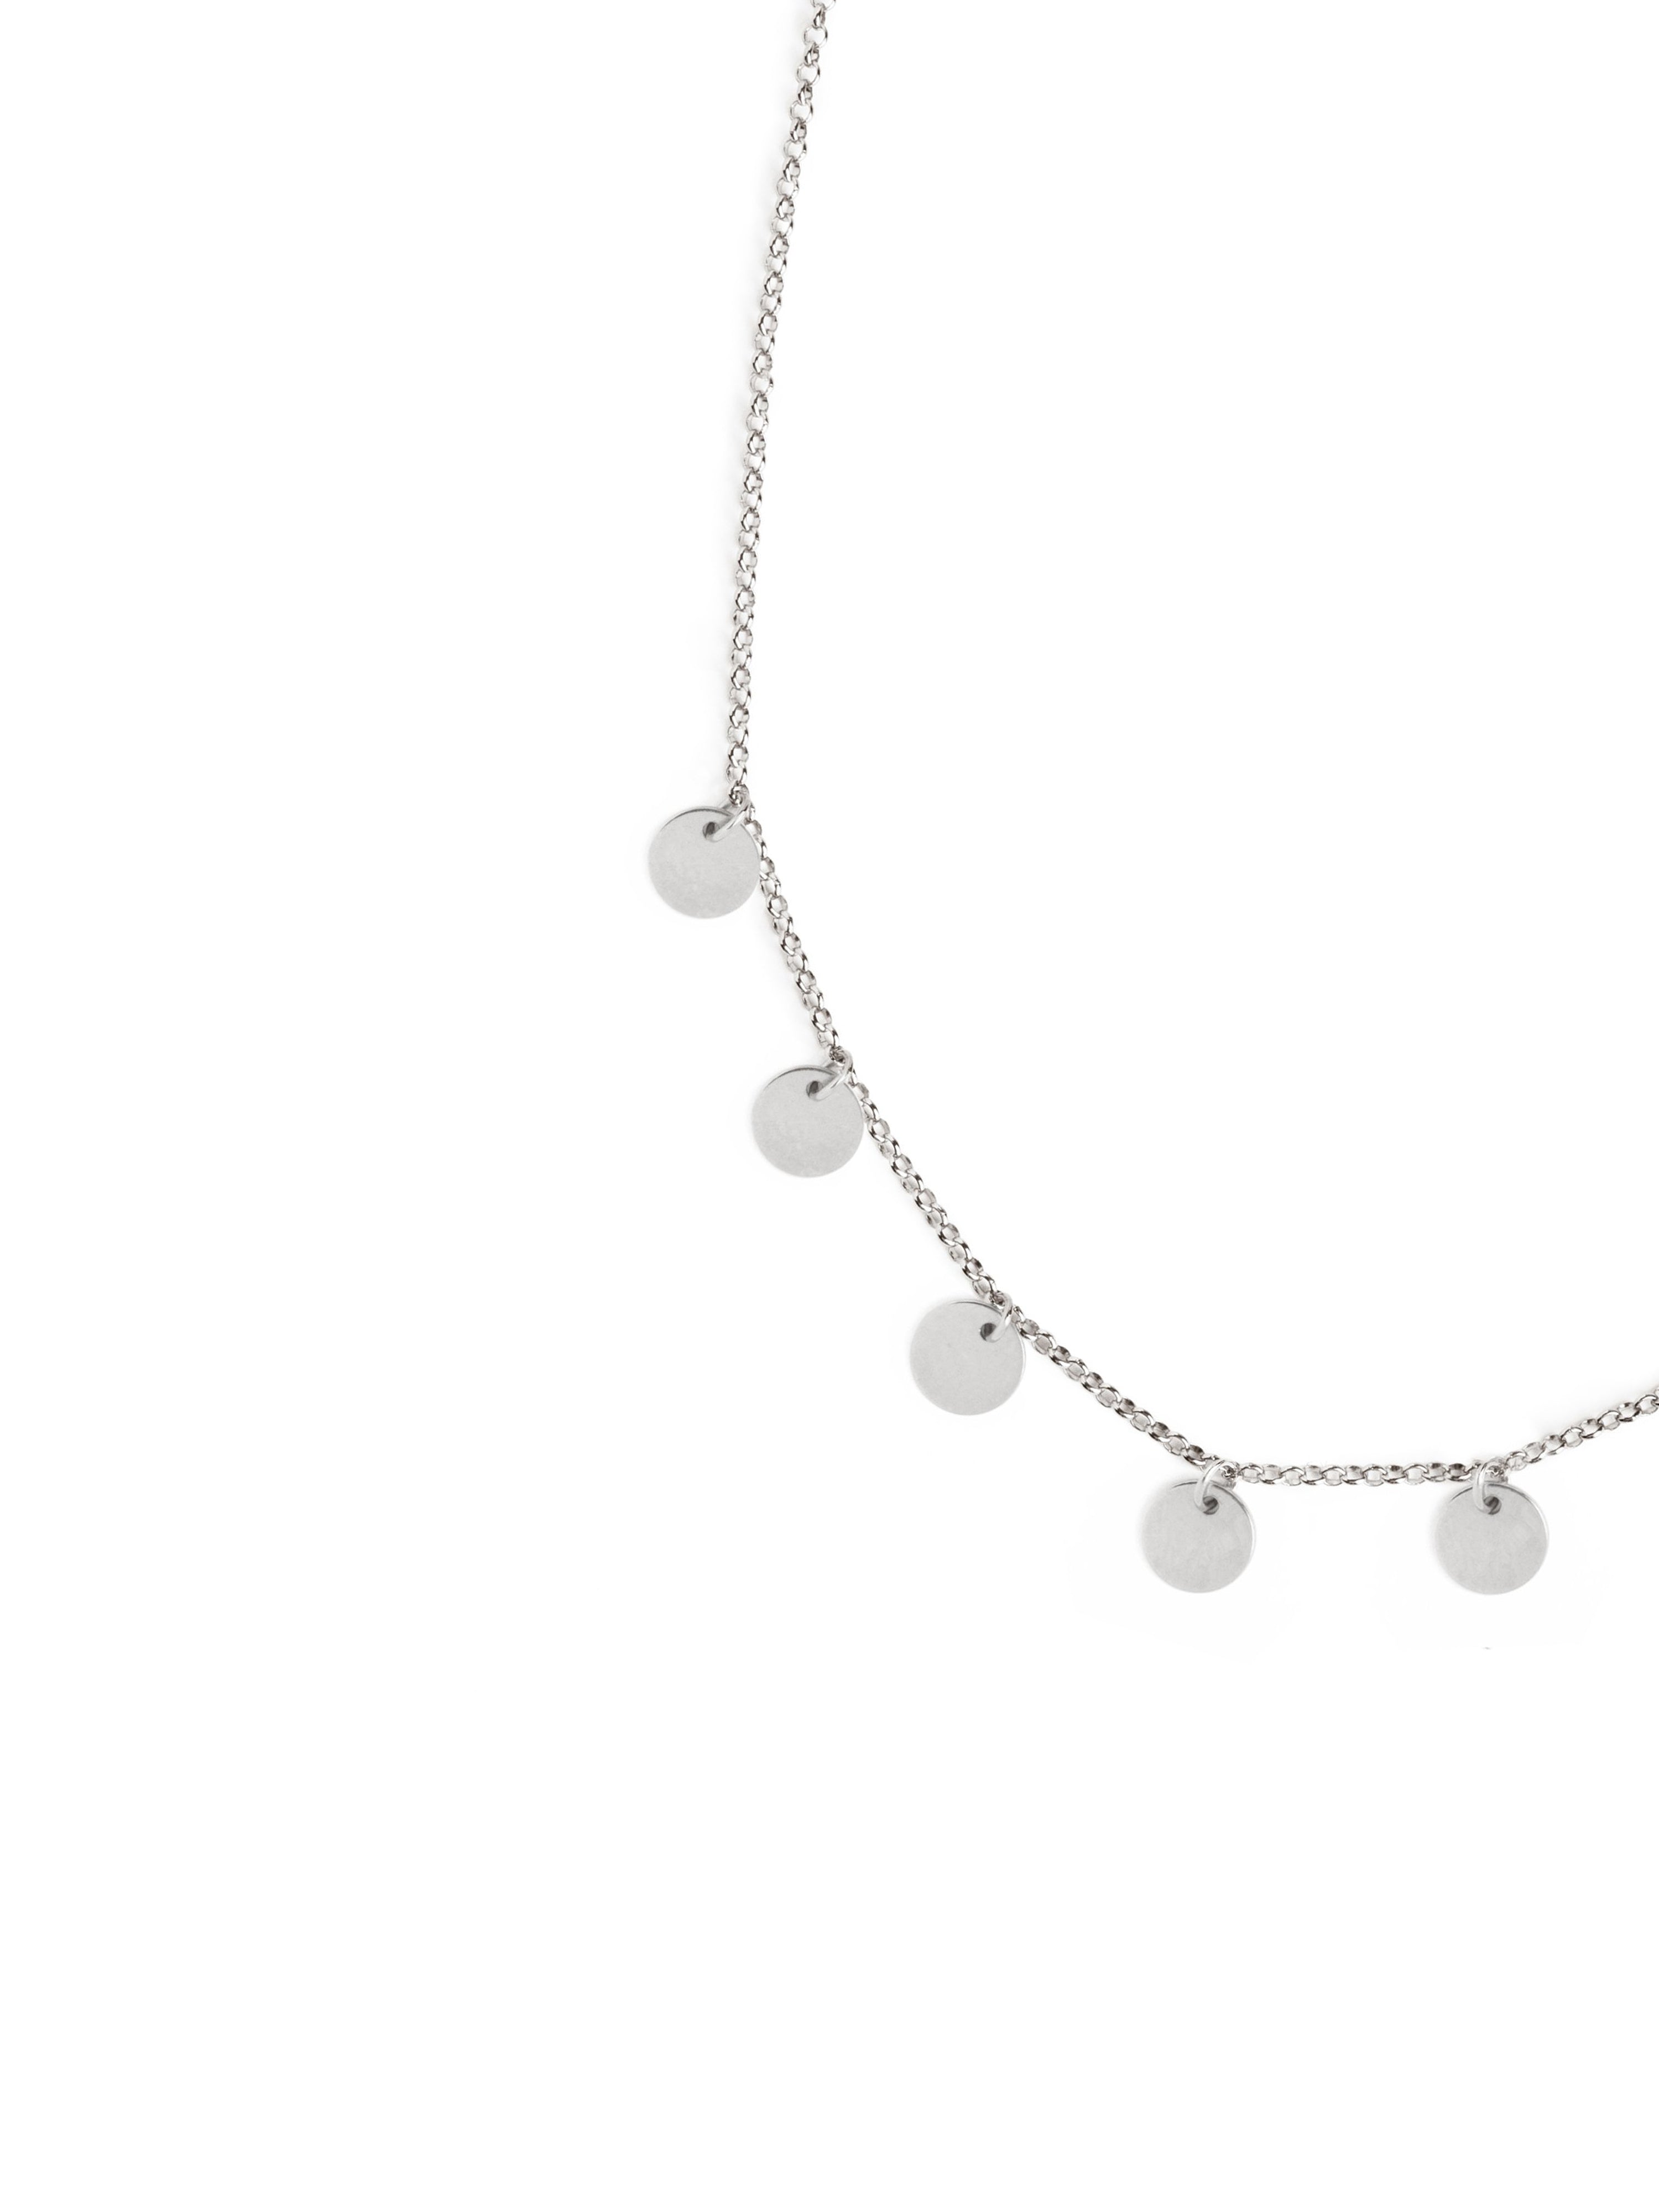 Mini Moons Silver Necklace